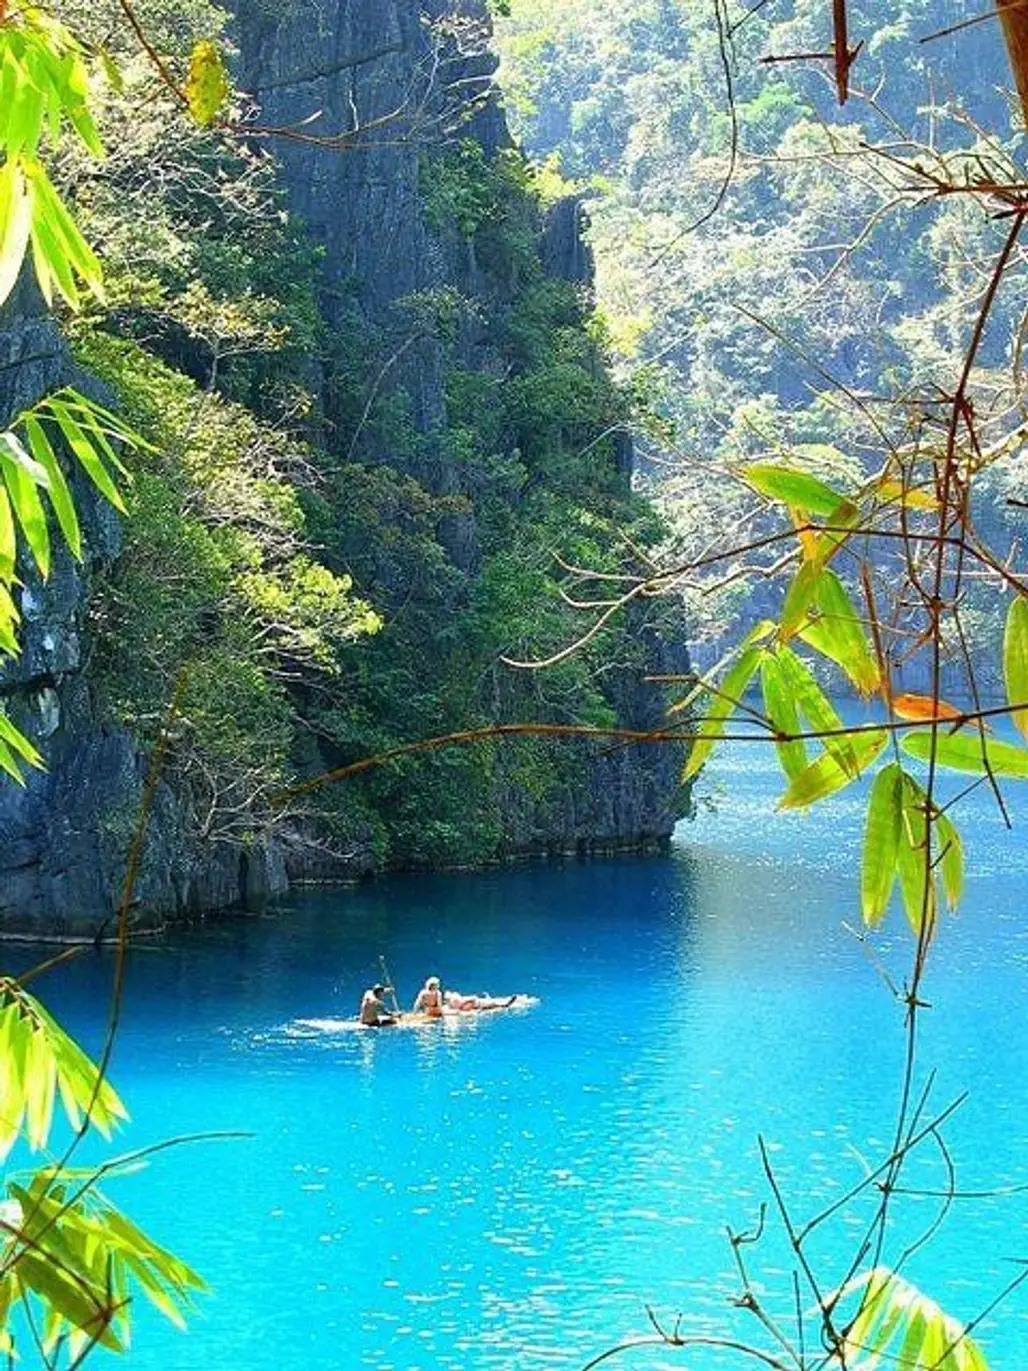 The Turquoise Paradise in Bali, Indonesia